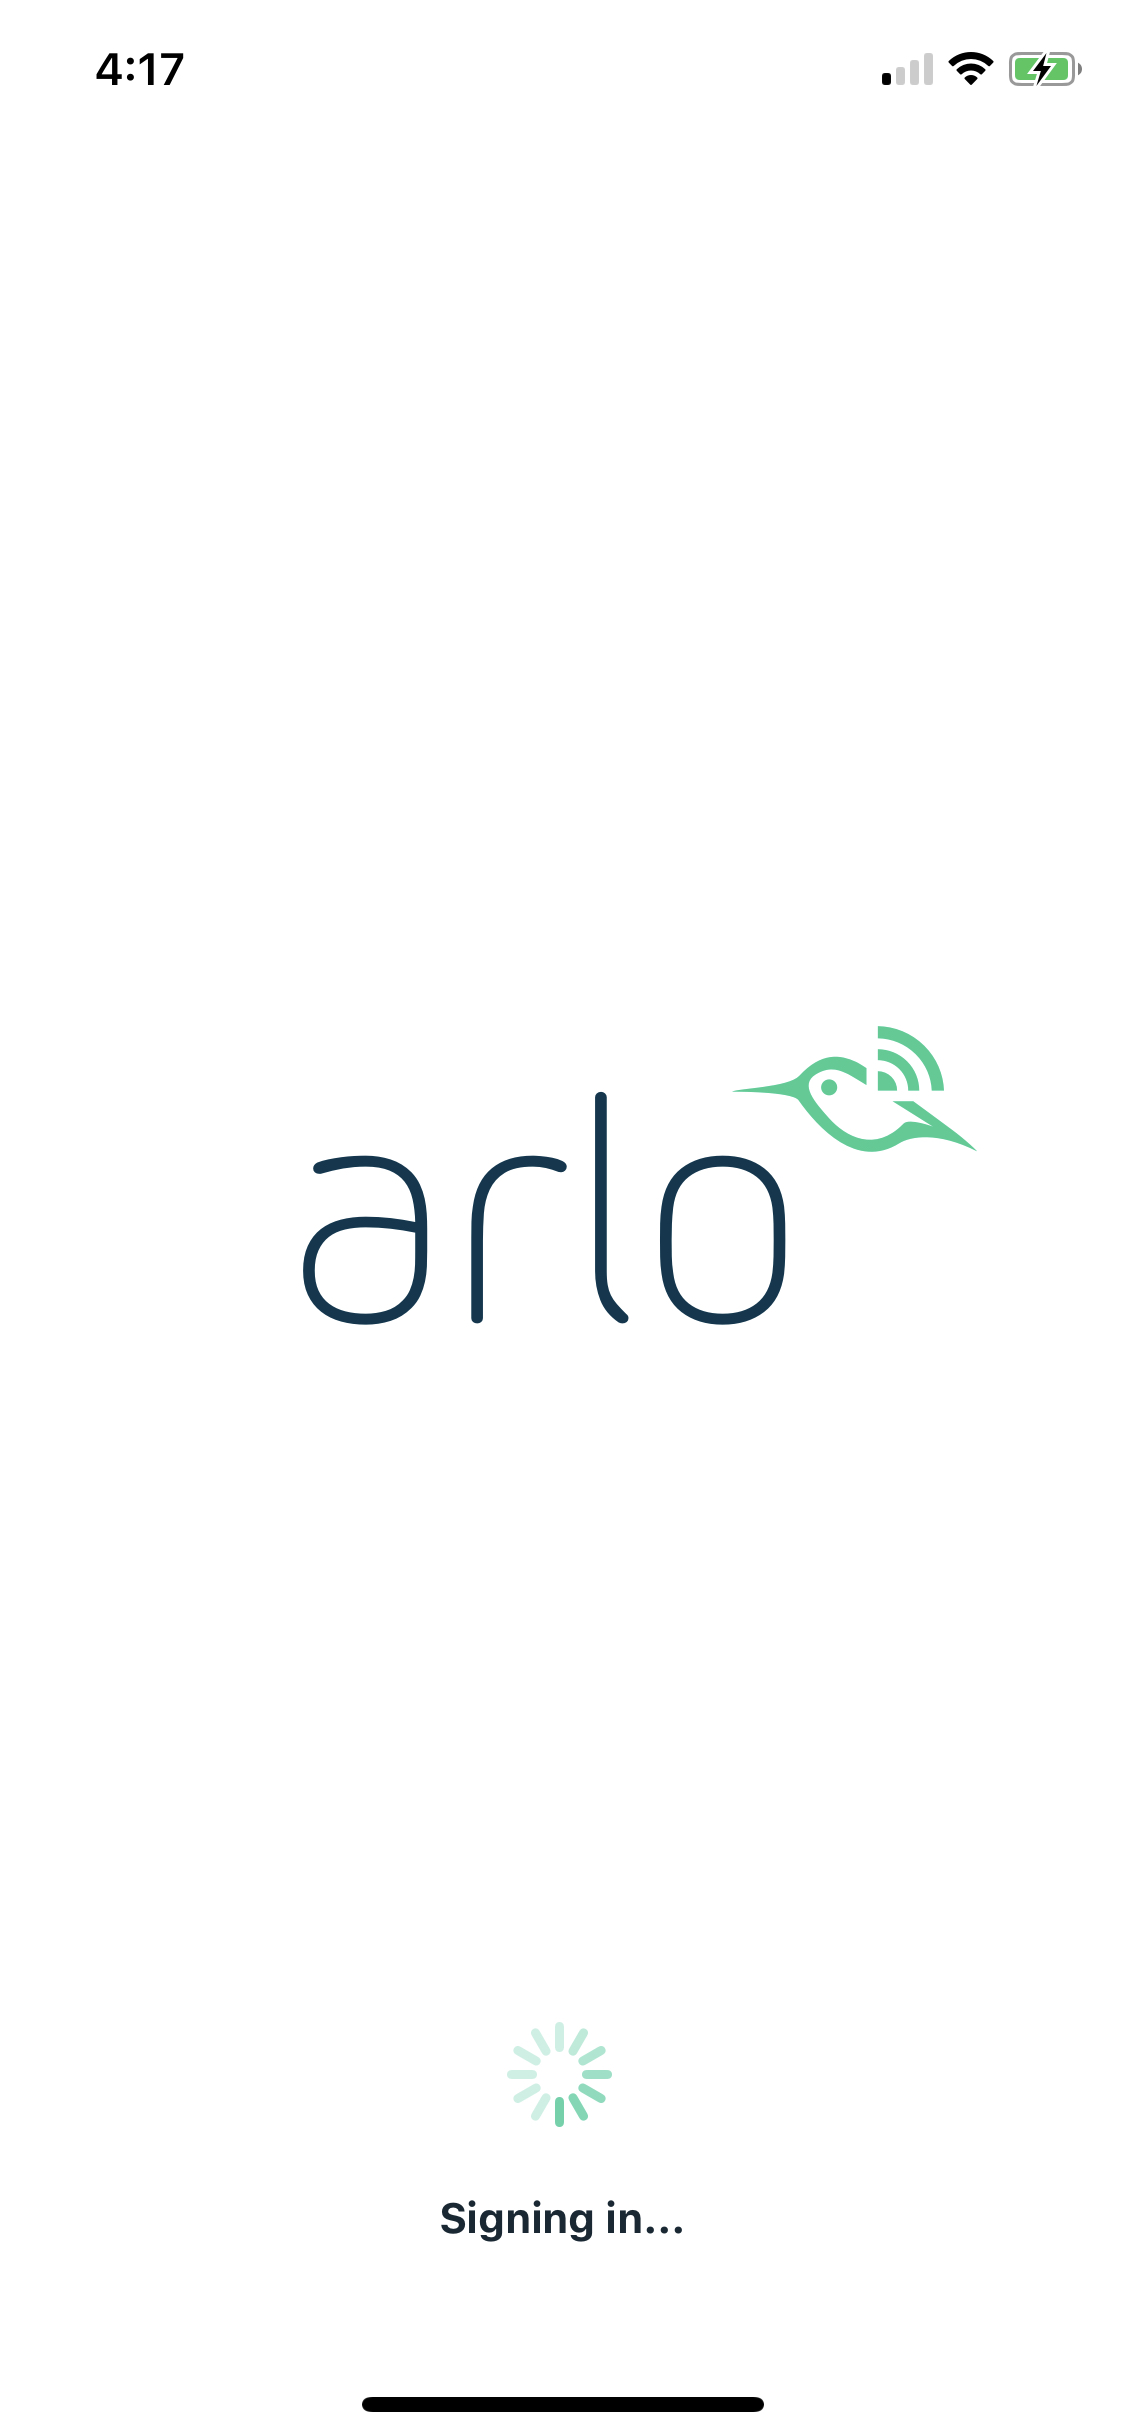 Arlo stuck sign in page - Community